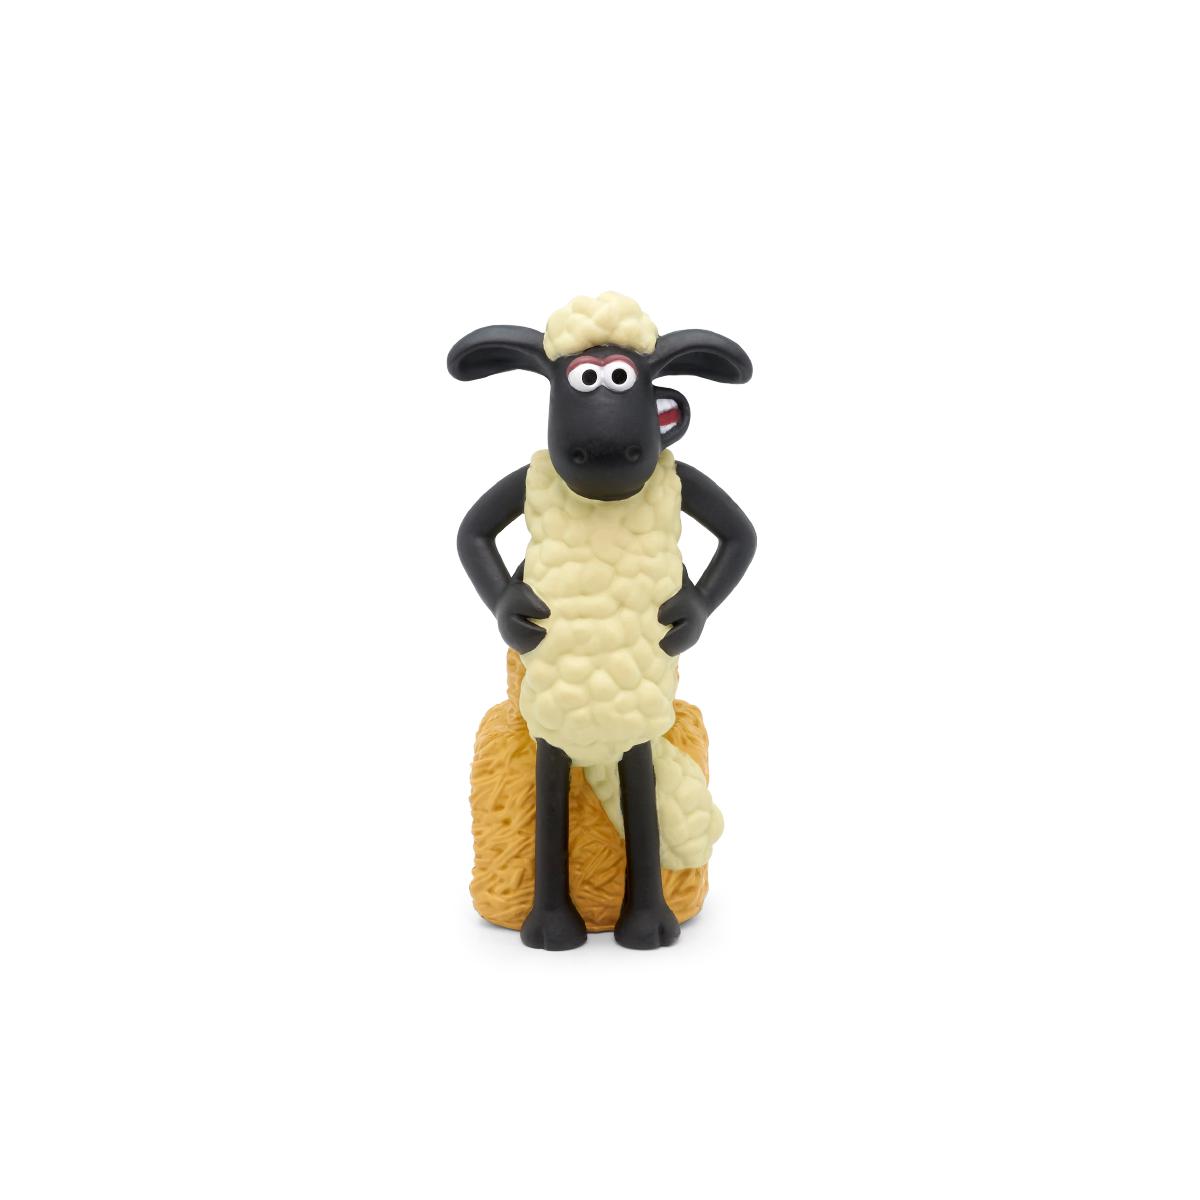 Tonies Shaun the Sheep - The Farmer's Llamas - Audio Character for use with Toniebox Player